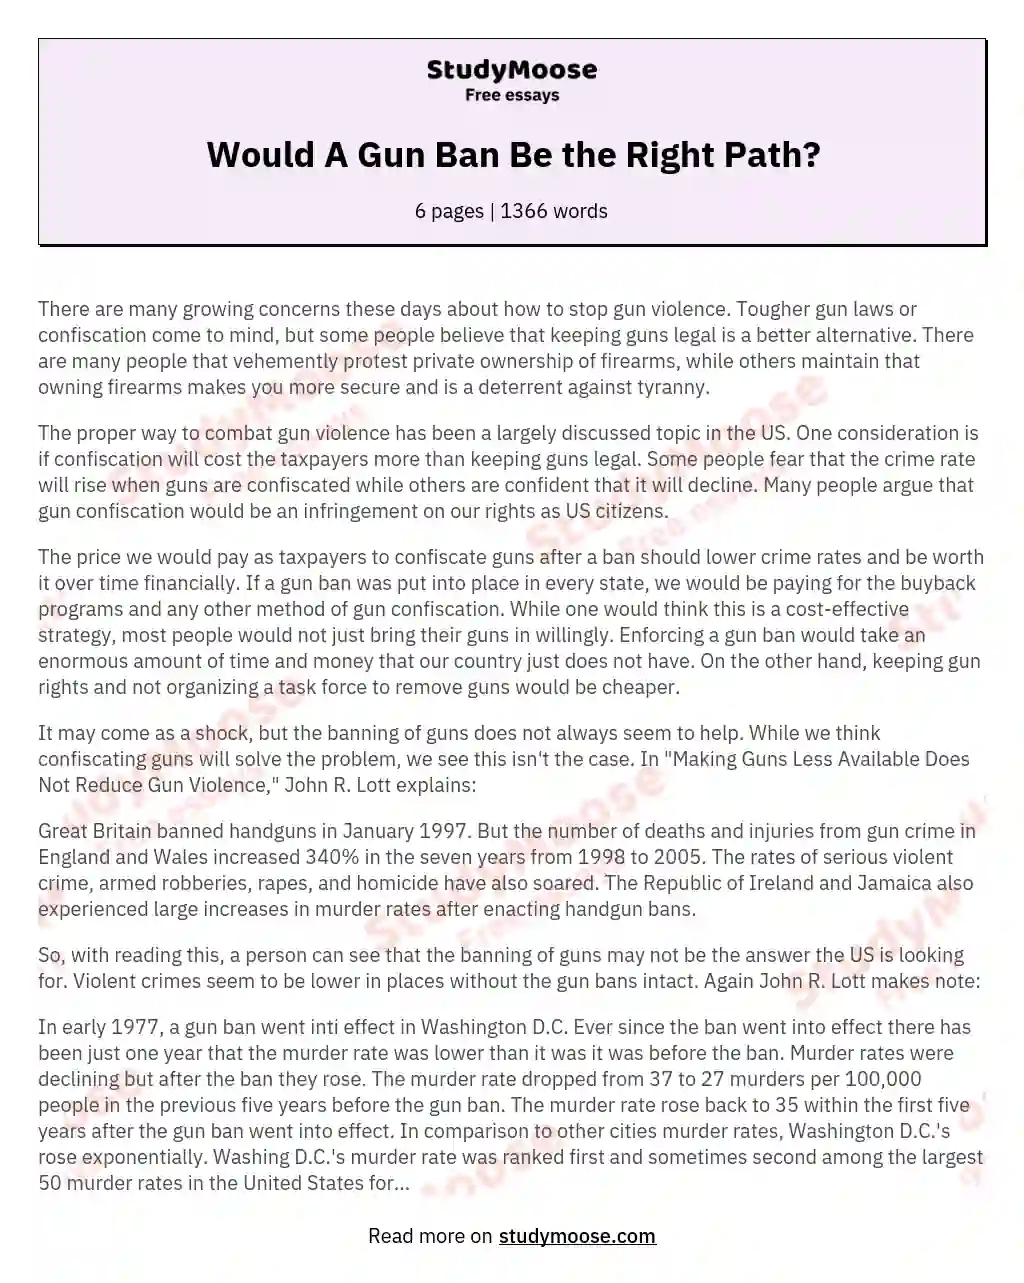 Would A Gun Ban Be the Right Path?